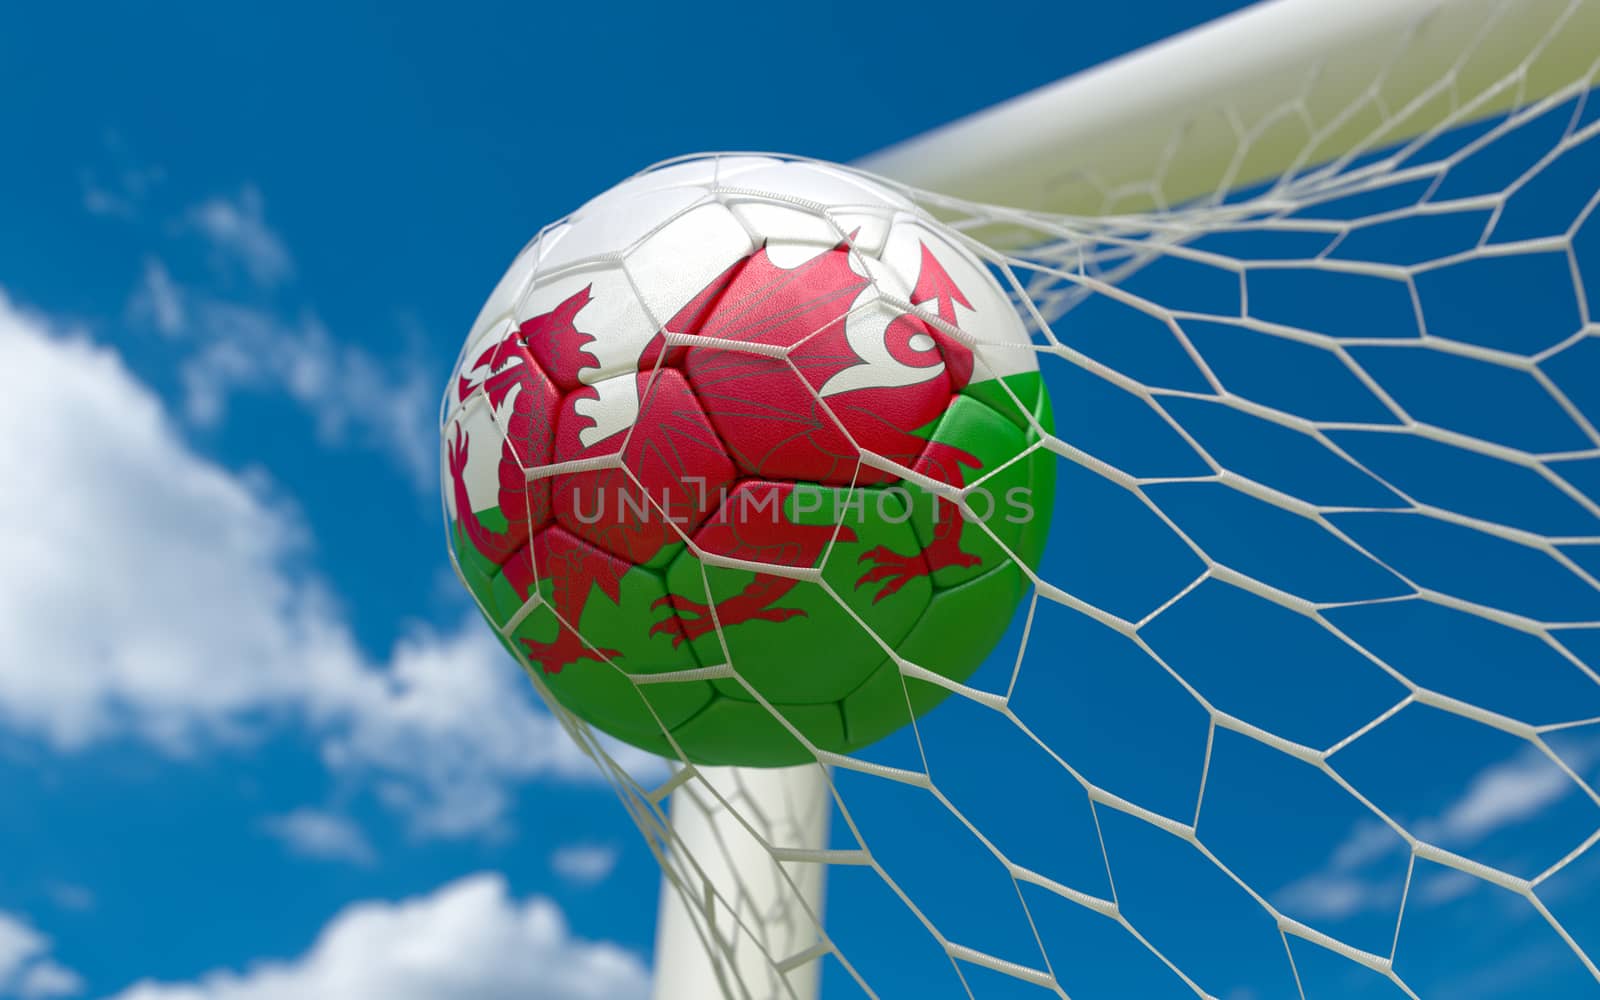 Wales flag and soccer ball in goal net by Barbraford